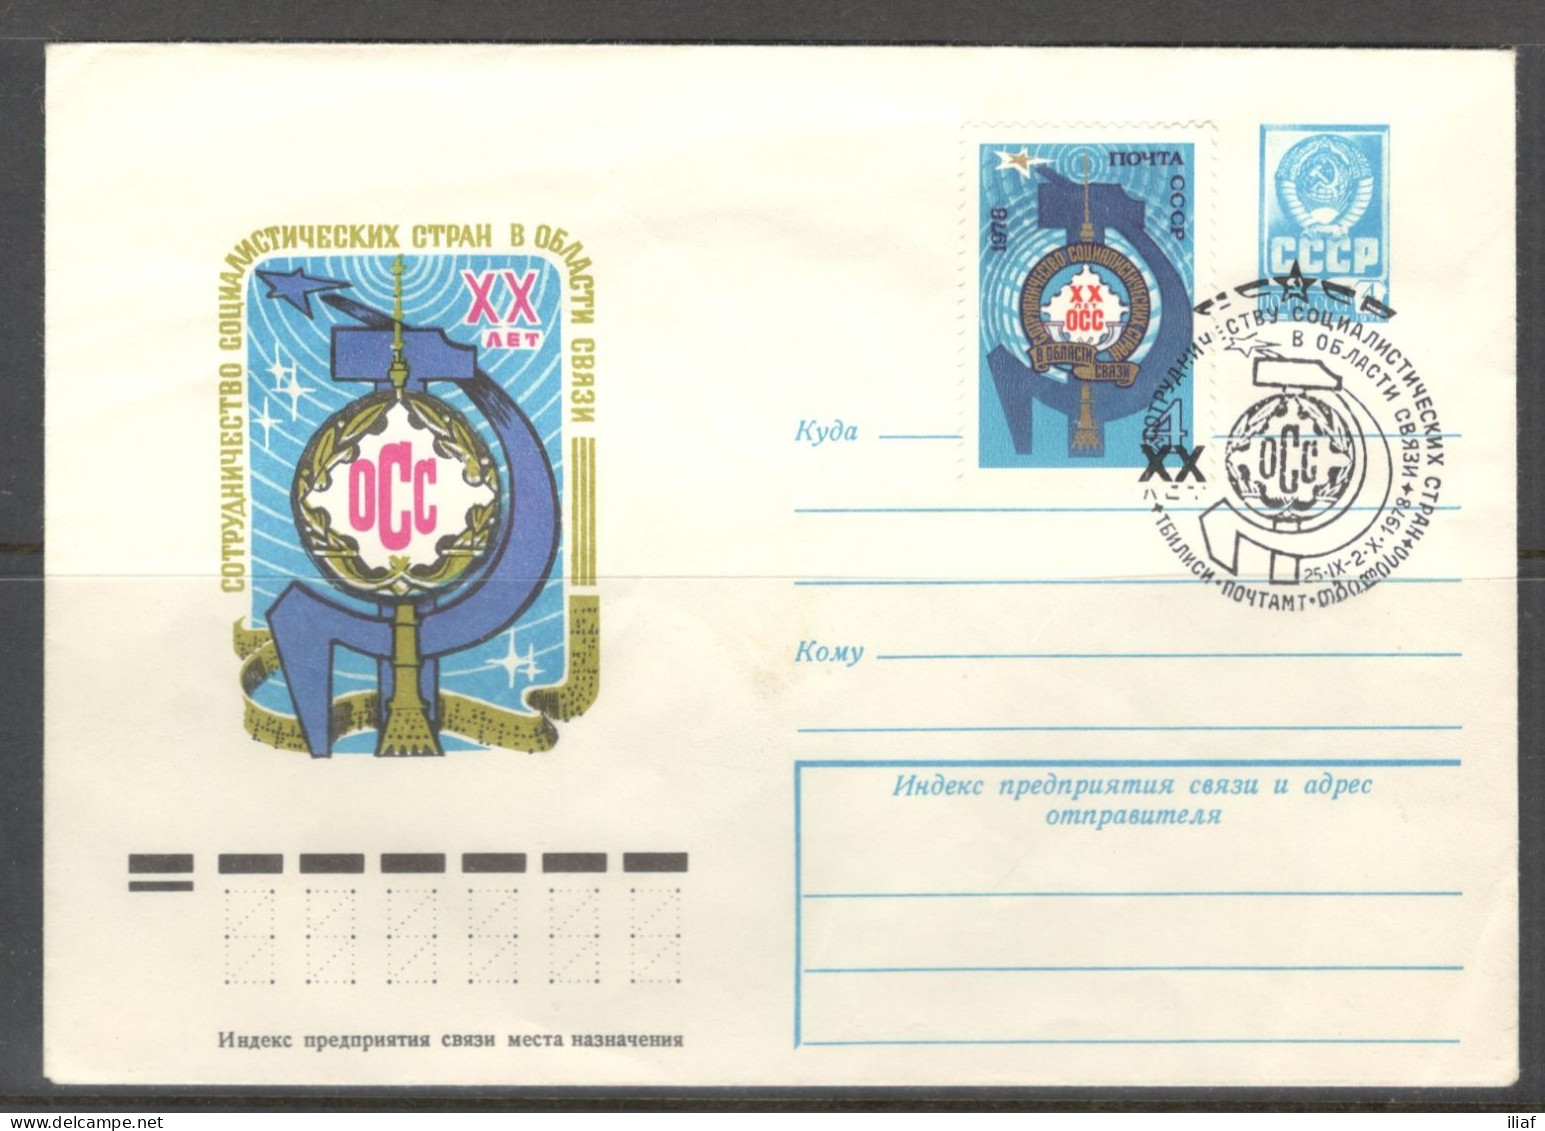 RUSSIA & USSR. 20 Years Of Cooperation Of The Socialist Countries In The Field Of Communications.  Illustrated Envelope - Post